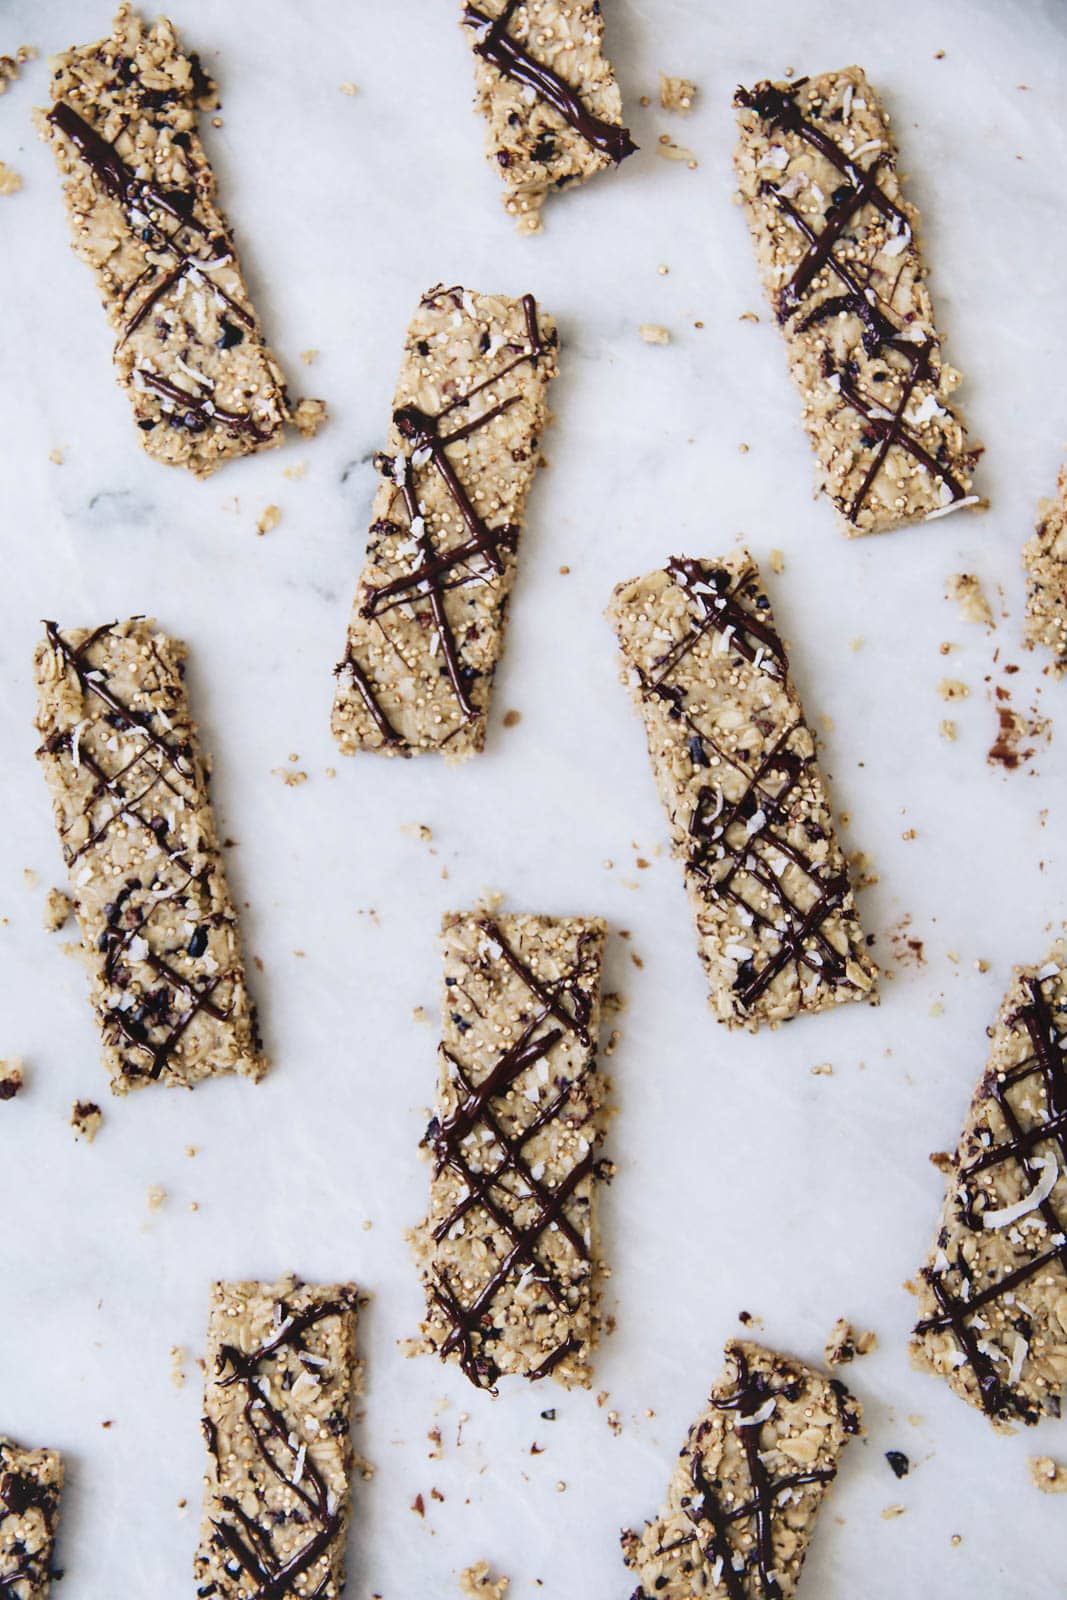 Raw, vegan, refined sugar free, and yet somehow still tasting like dessert, these raw tahini granola bars are THE next best thing!